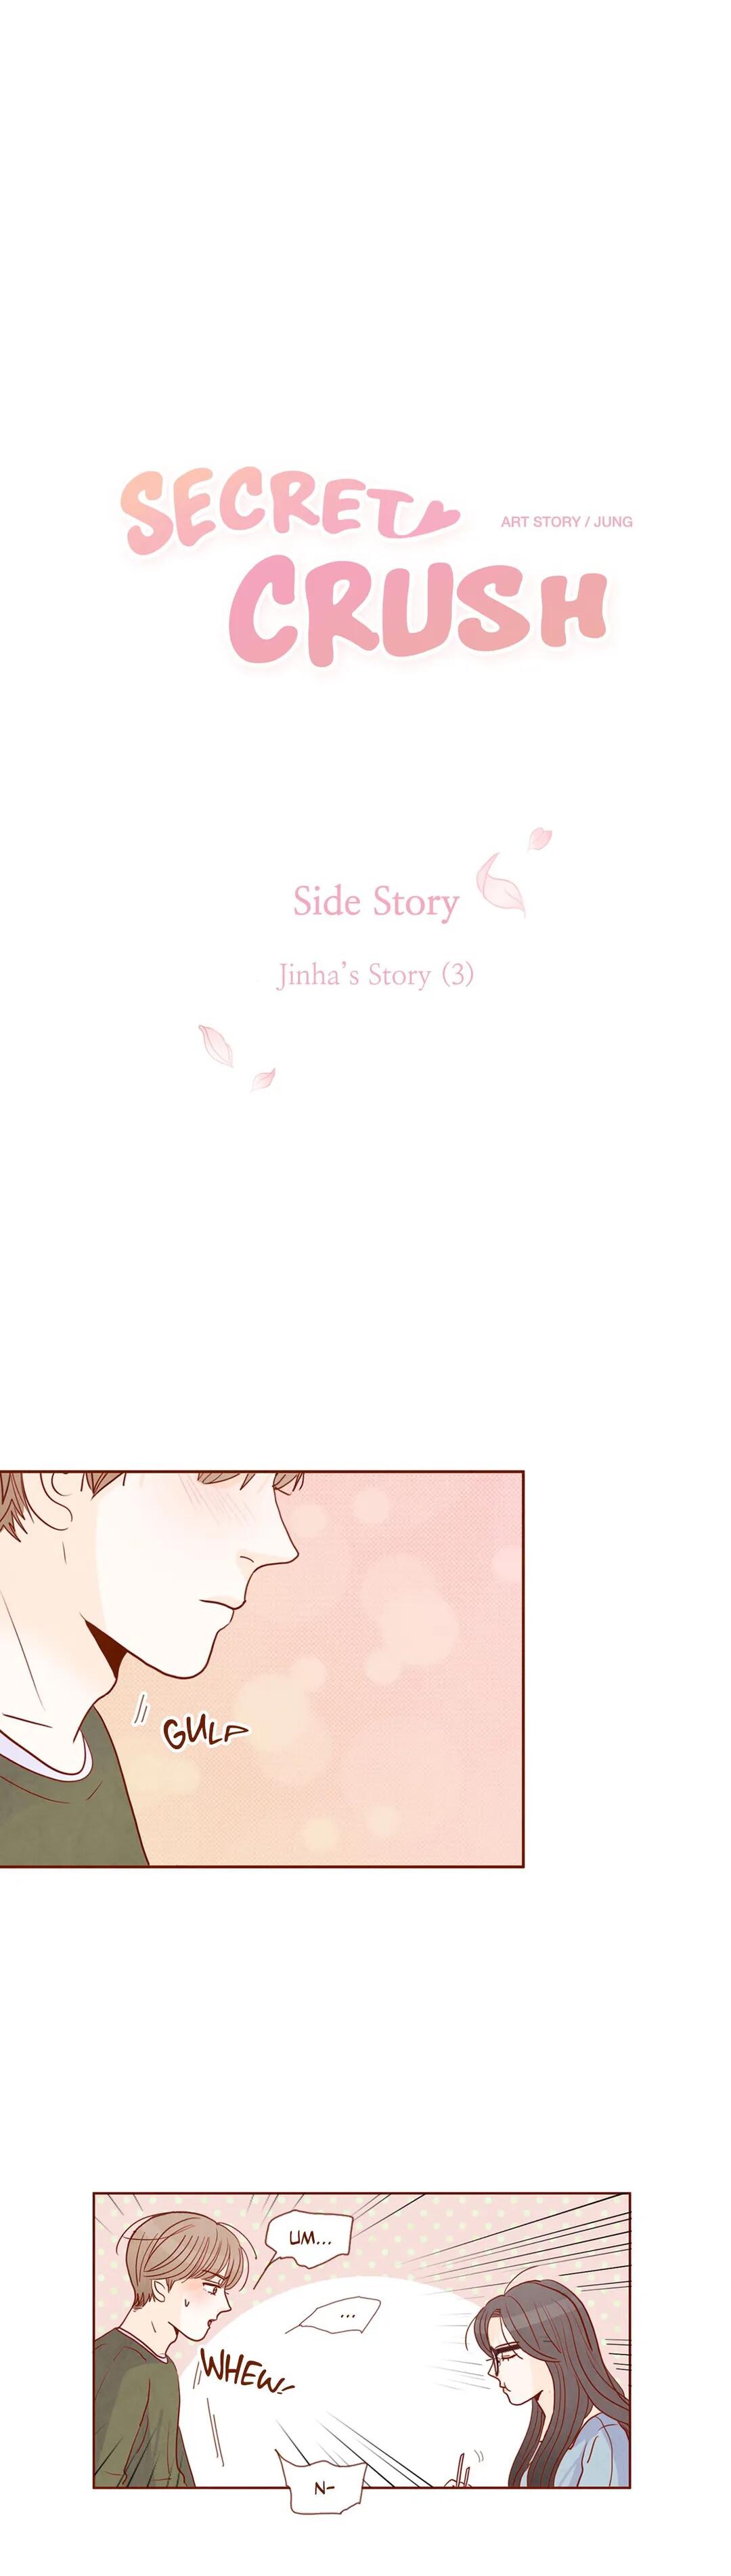 Secret Crush Chapter 96 - Side Story: Jinha's Story (3) - Picture 1